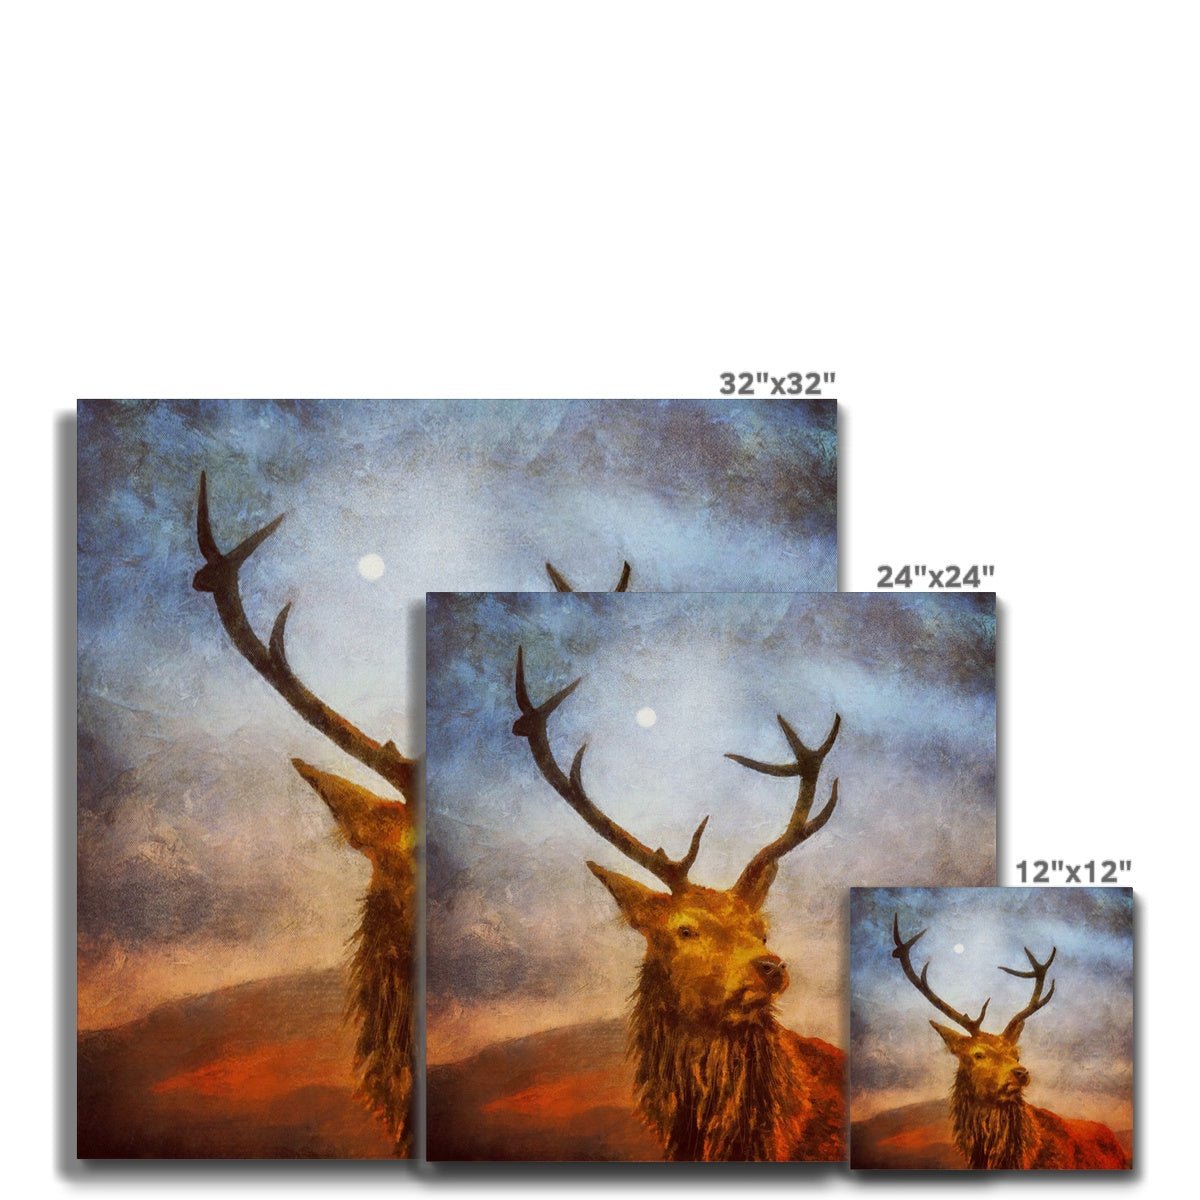 A Moonlit Highland Stag Painting | Canvas From Scotland-Contemporary Stretched Canvas Prints-Scottish Highlands & Lowlands Art Gallery-Paintings, Prints, Homeware, Art Gifts From Scotland By Scottish Artist Kevin Hunter